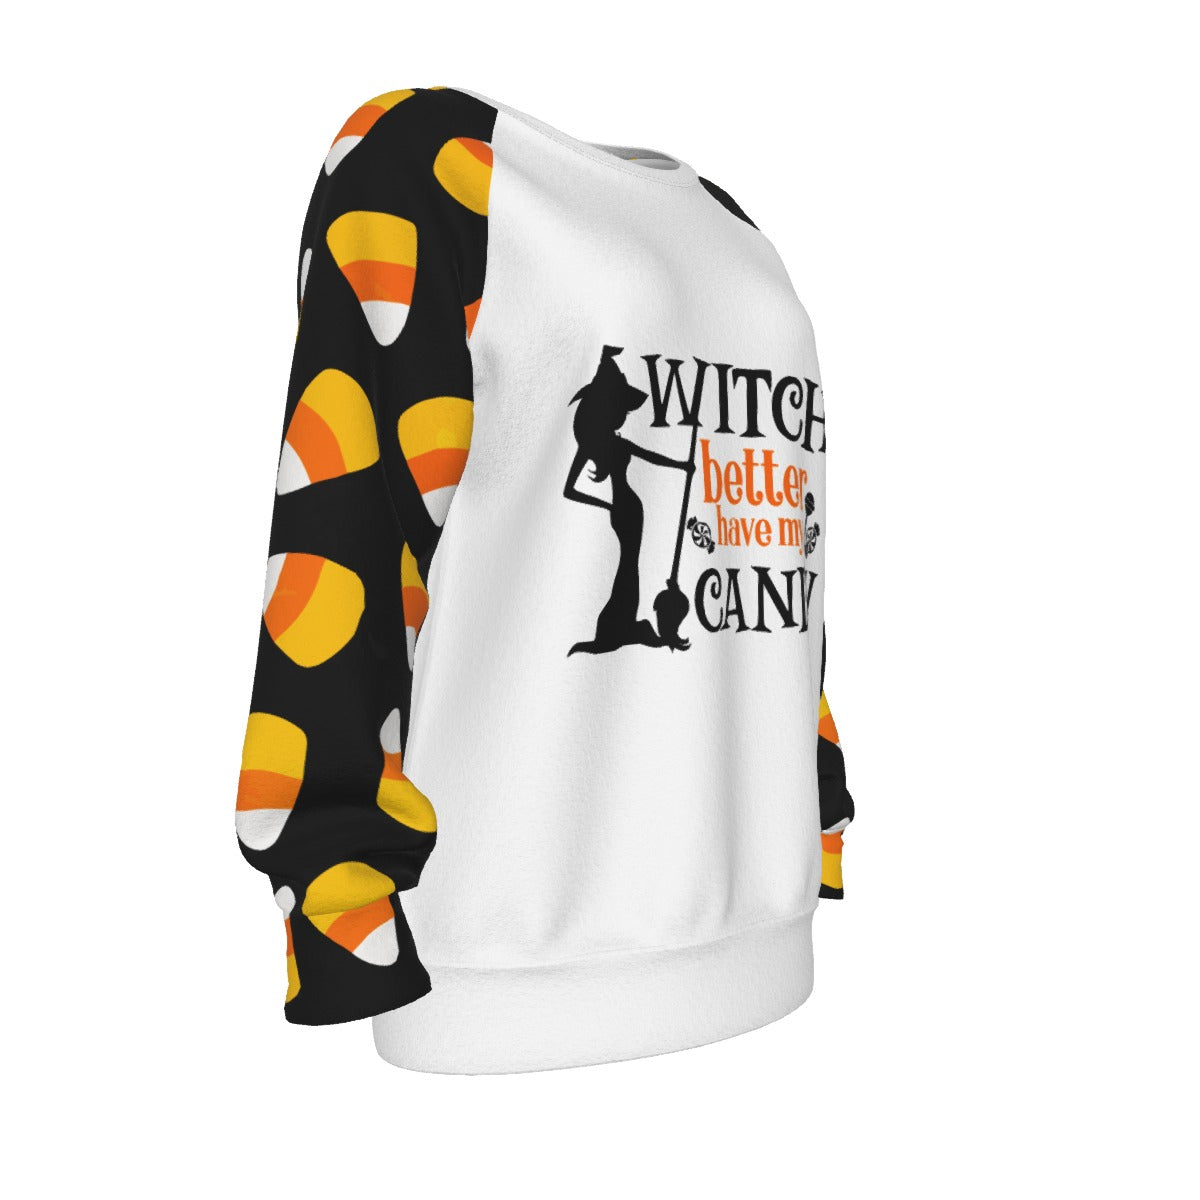 Women's Halloween "Witch better have my candy" Candy Sleeve Sweatshirt